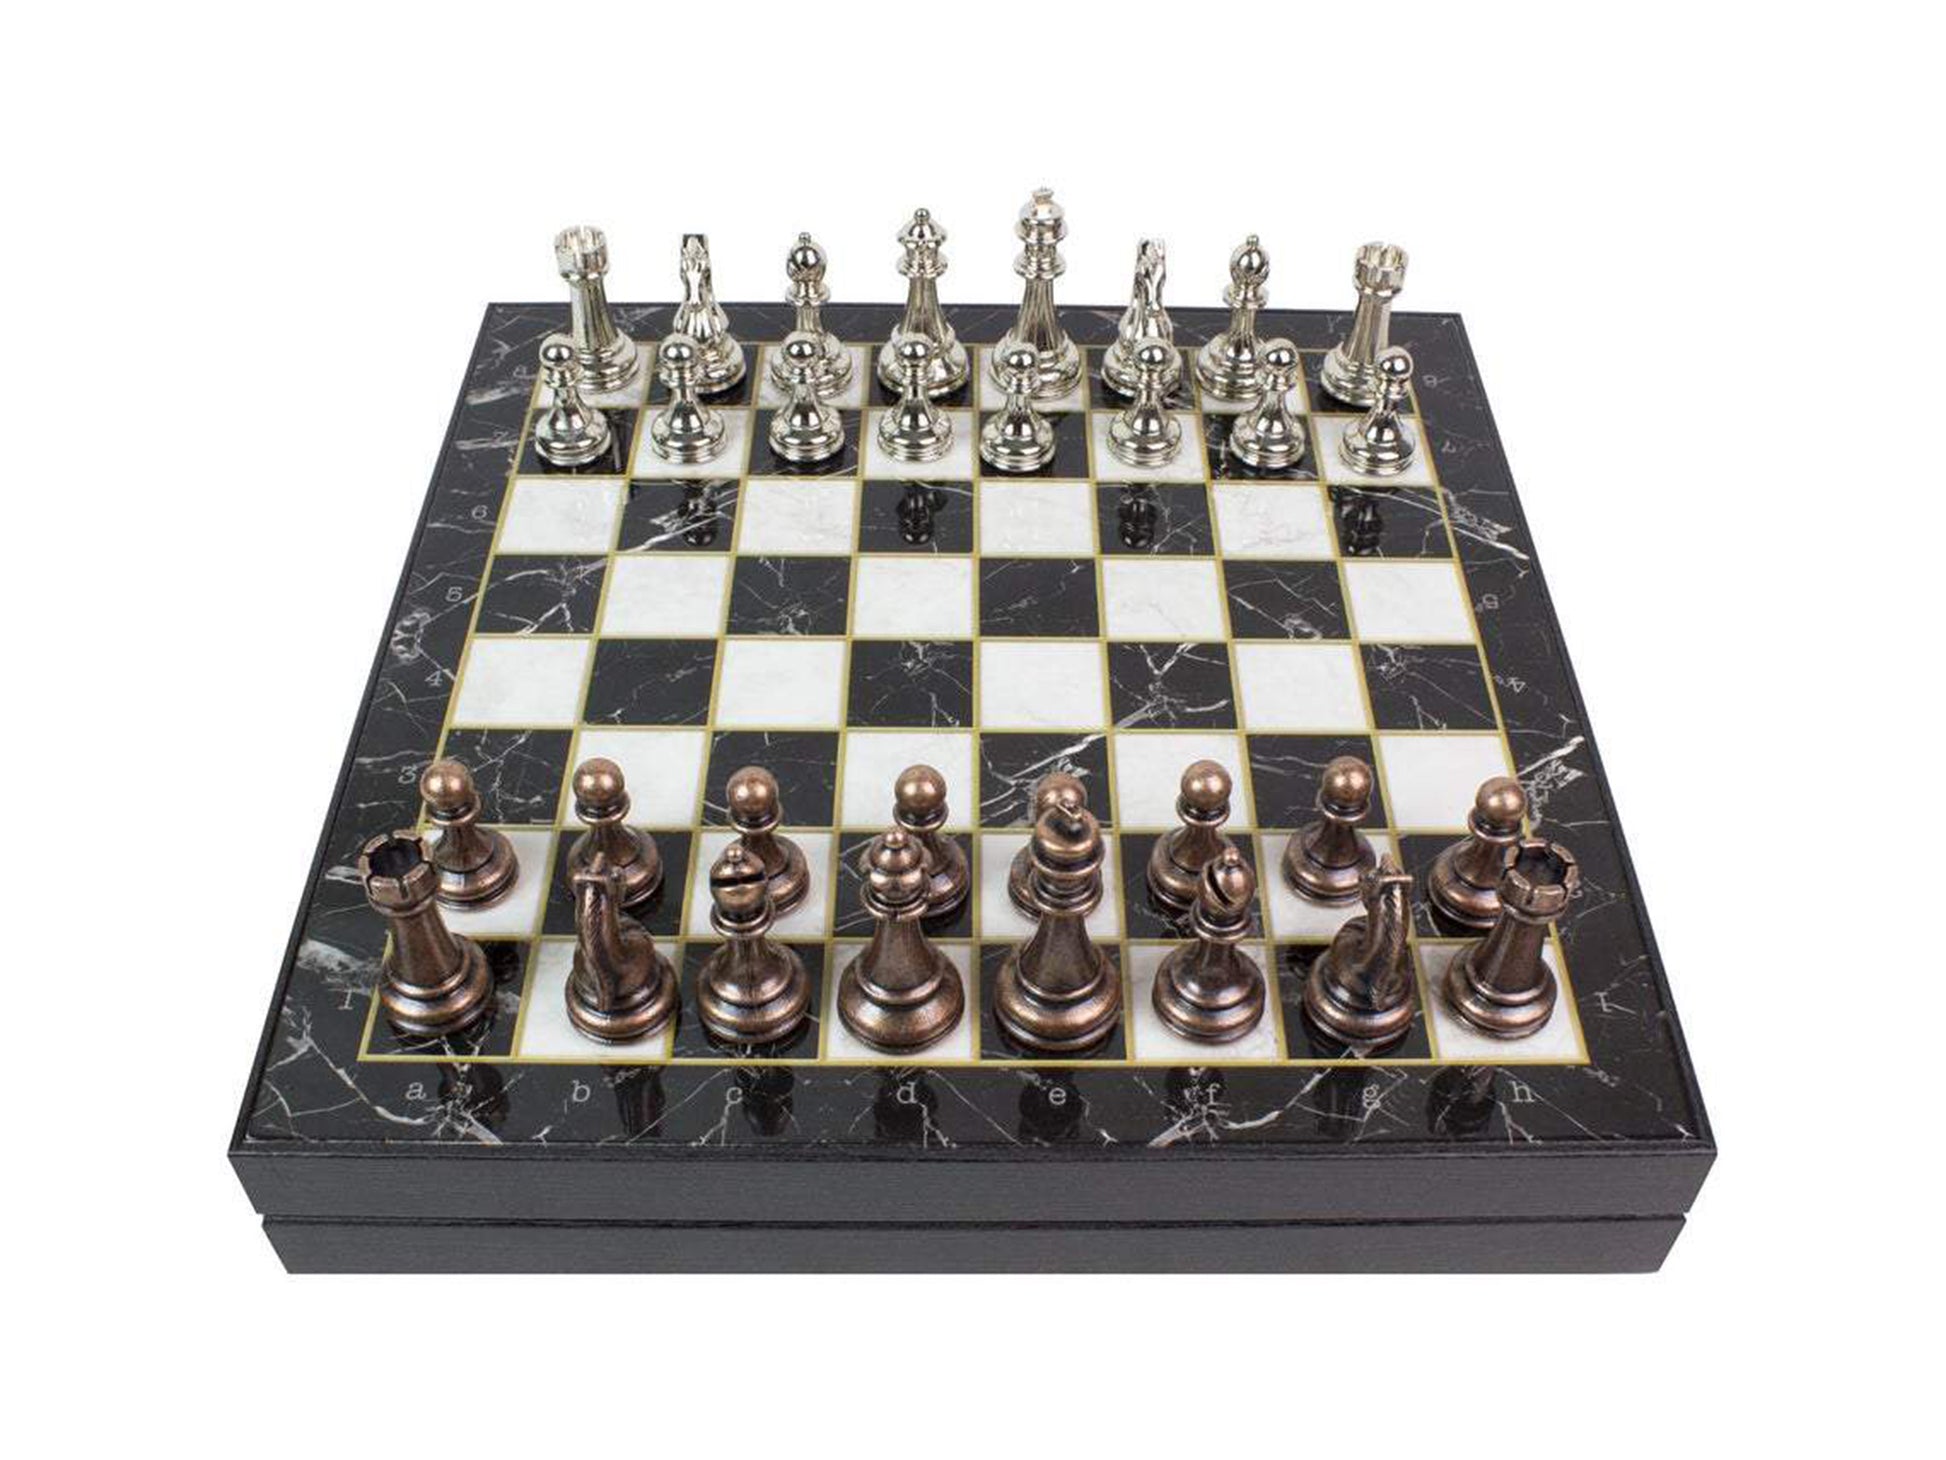 Marble Patterned Chess Box Set with Bronze & Silver Colored Metal Staunton Chessmen